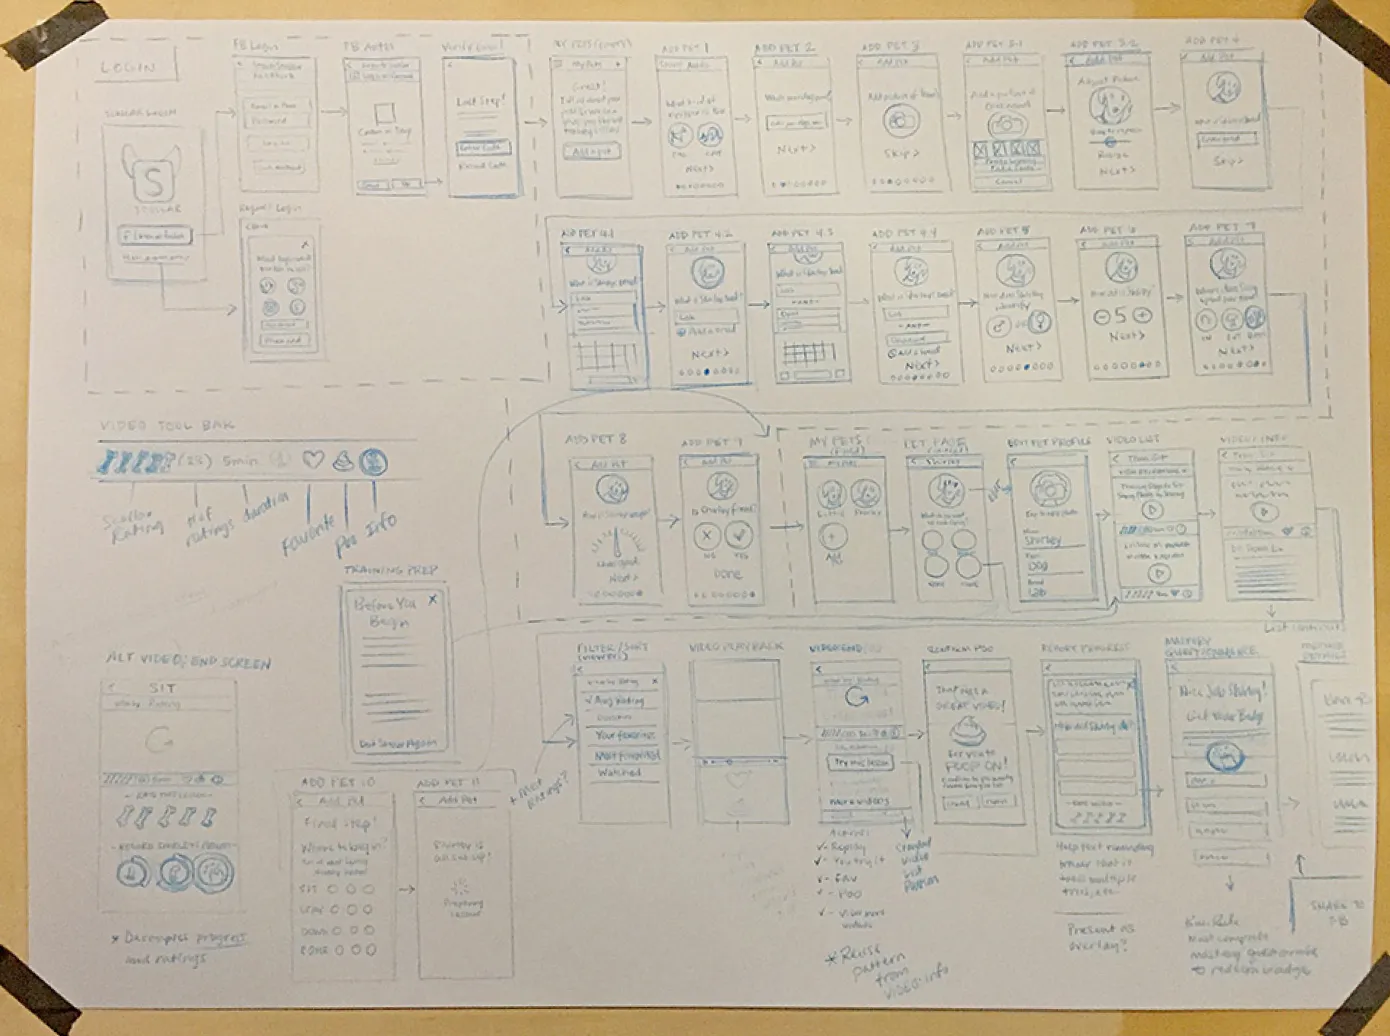 Image showing conceptual hand-sketches created during MVP mobile app planning process